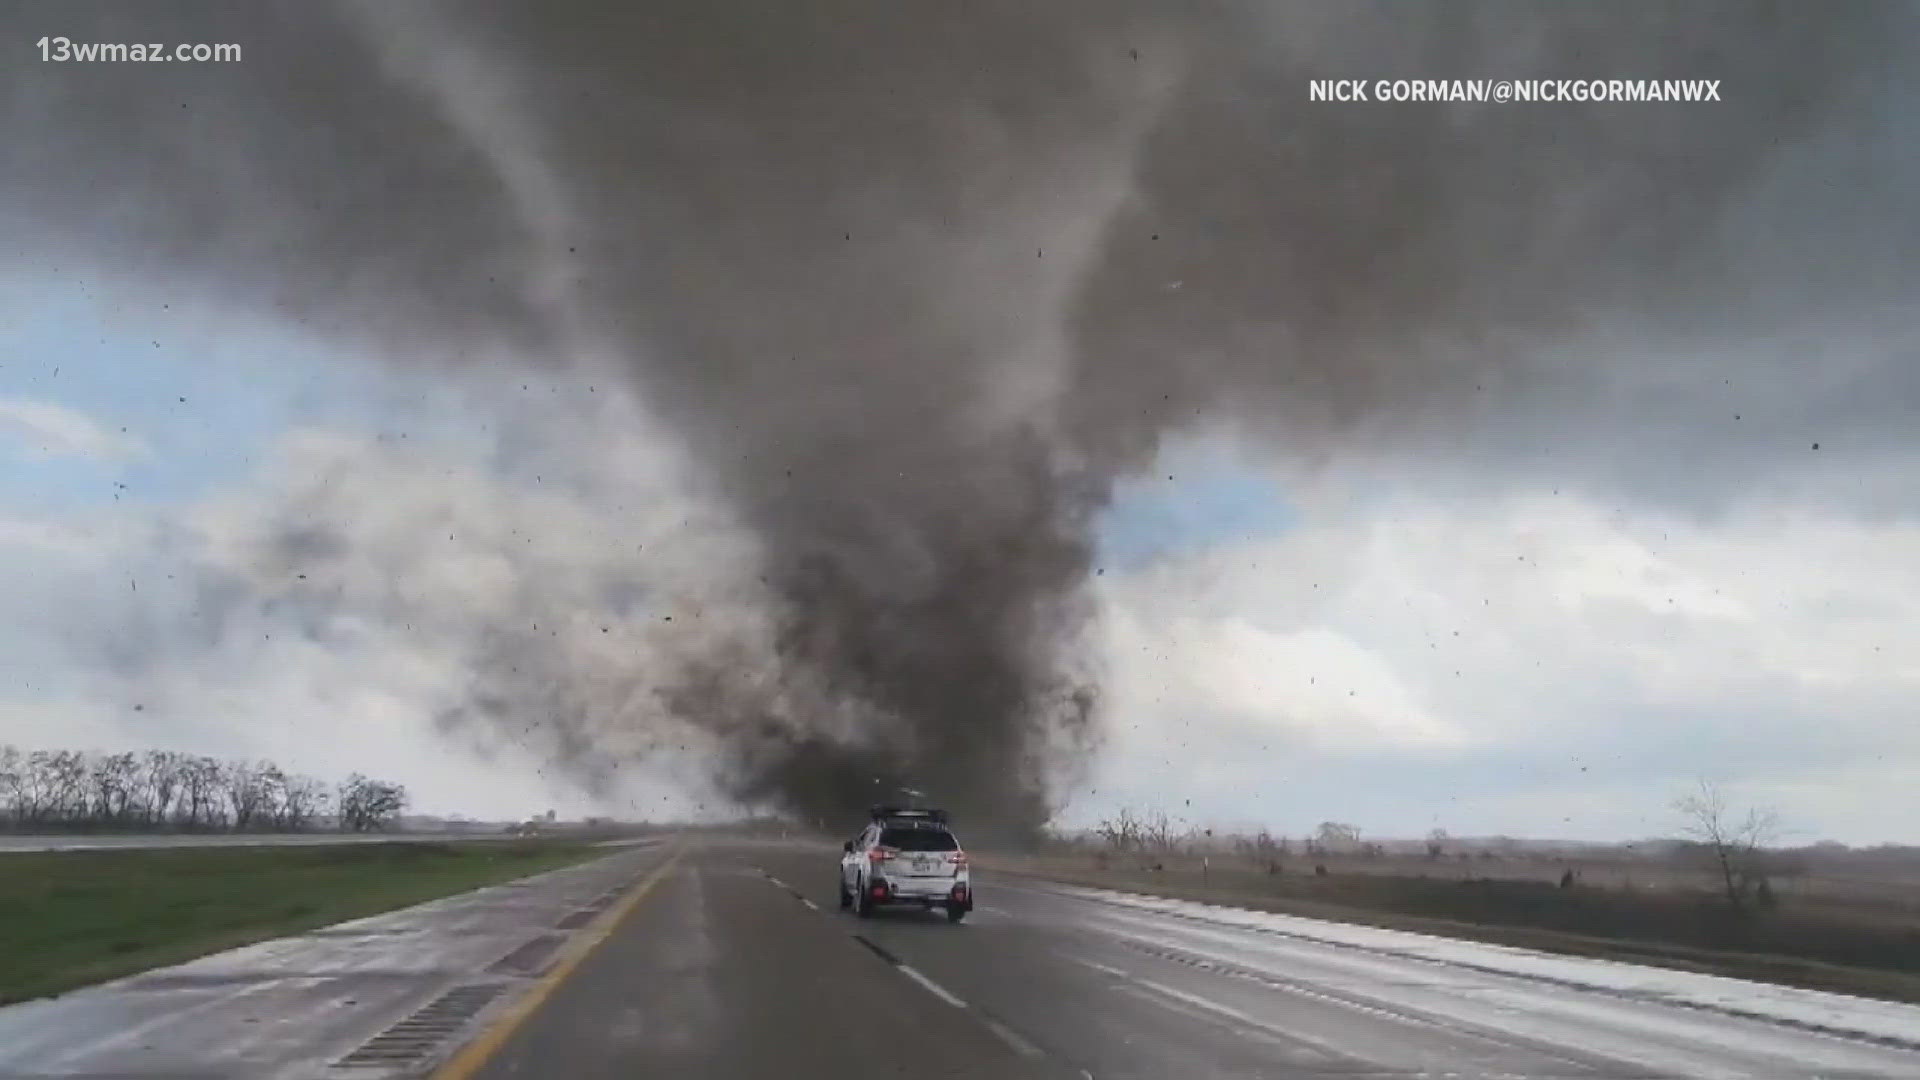 Rounding up this past weekend's tornado outbreak in the Midwest and Great Plains